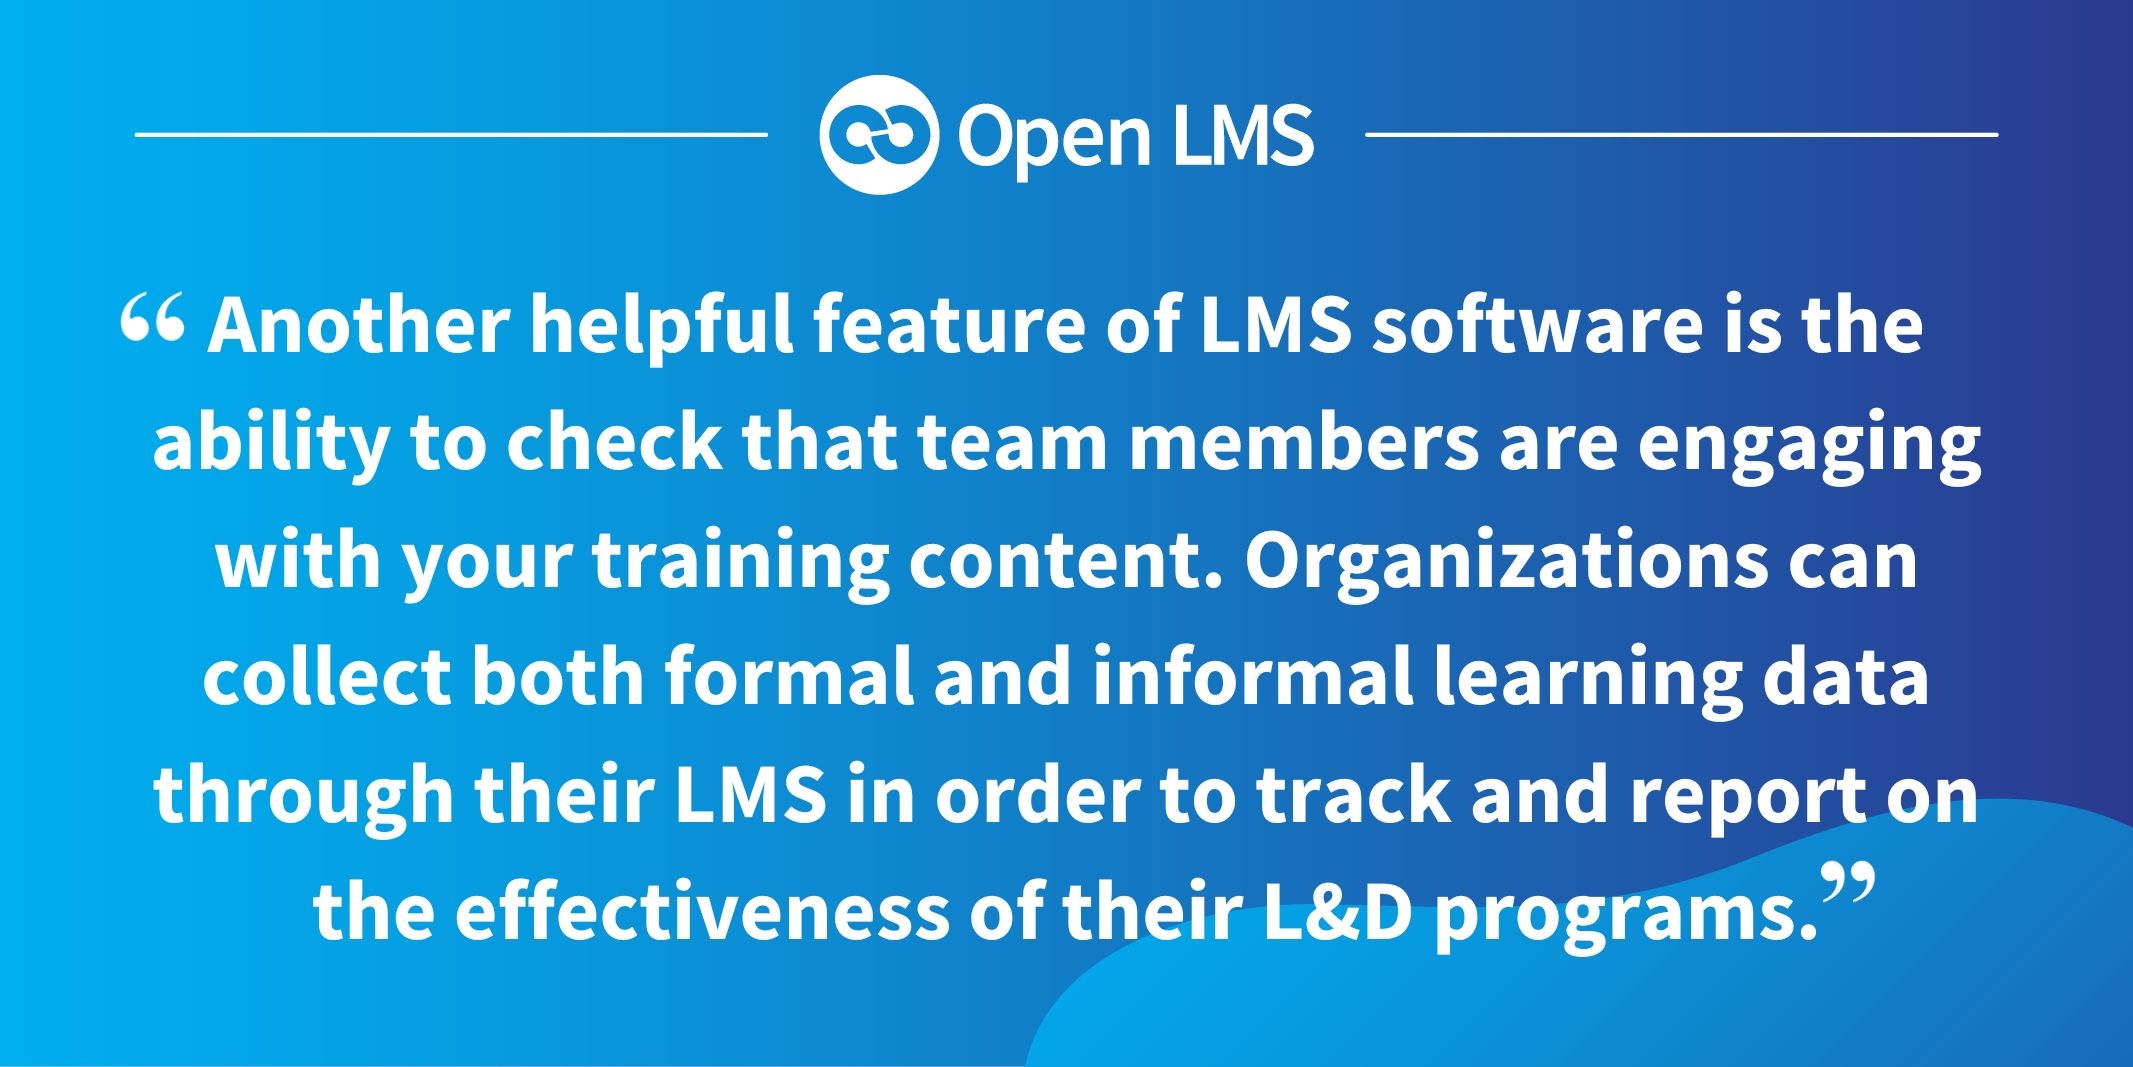 Another helpful feature of LMS software is the ability to check that team members are engaging with your training content. Organizations can collect both formal and informal learning data through their LMS in order to track and report on the effectiveness of their L&D programs.